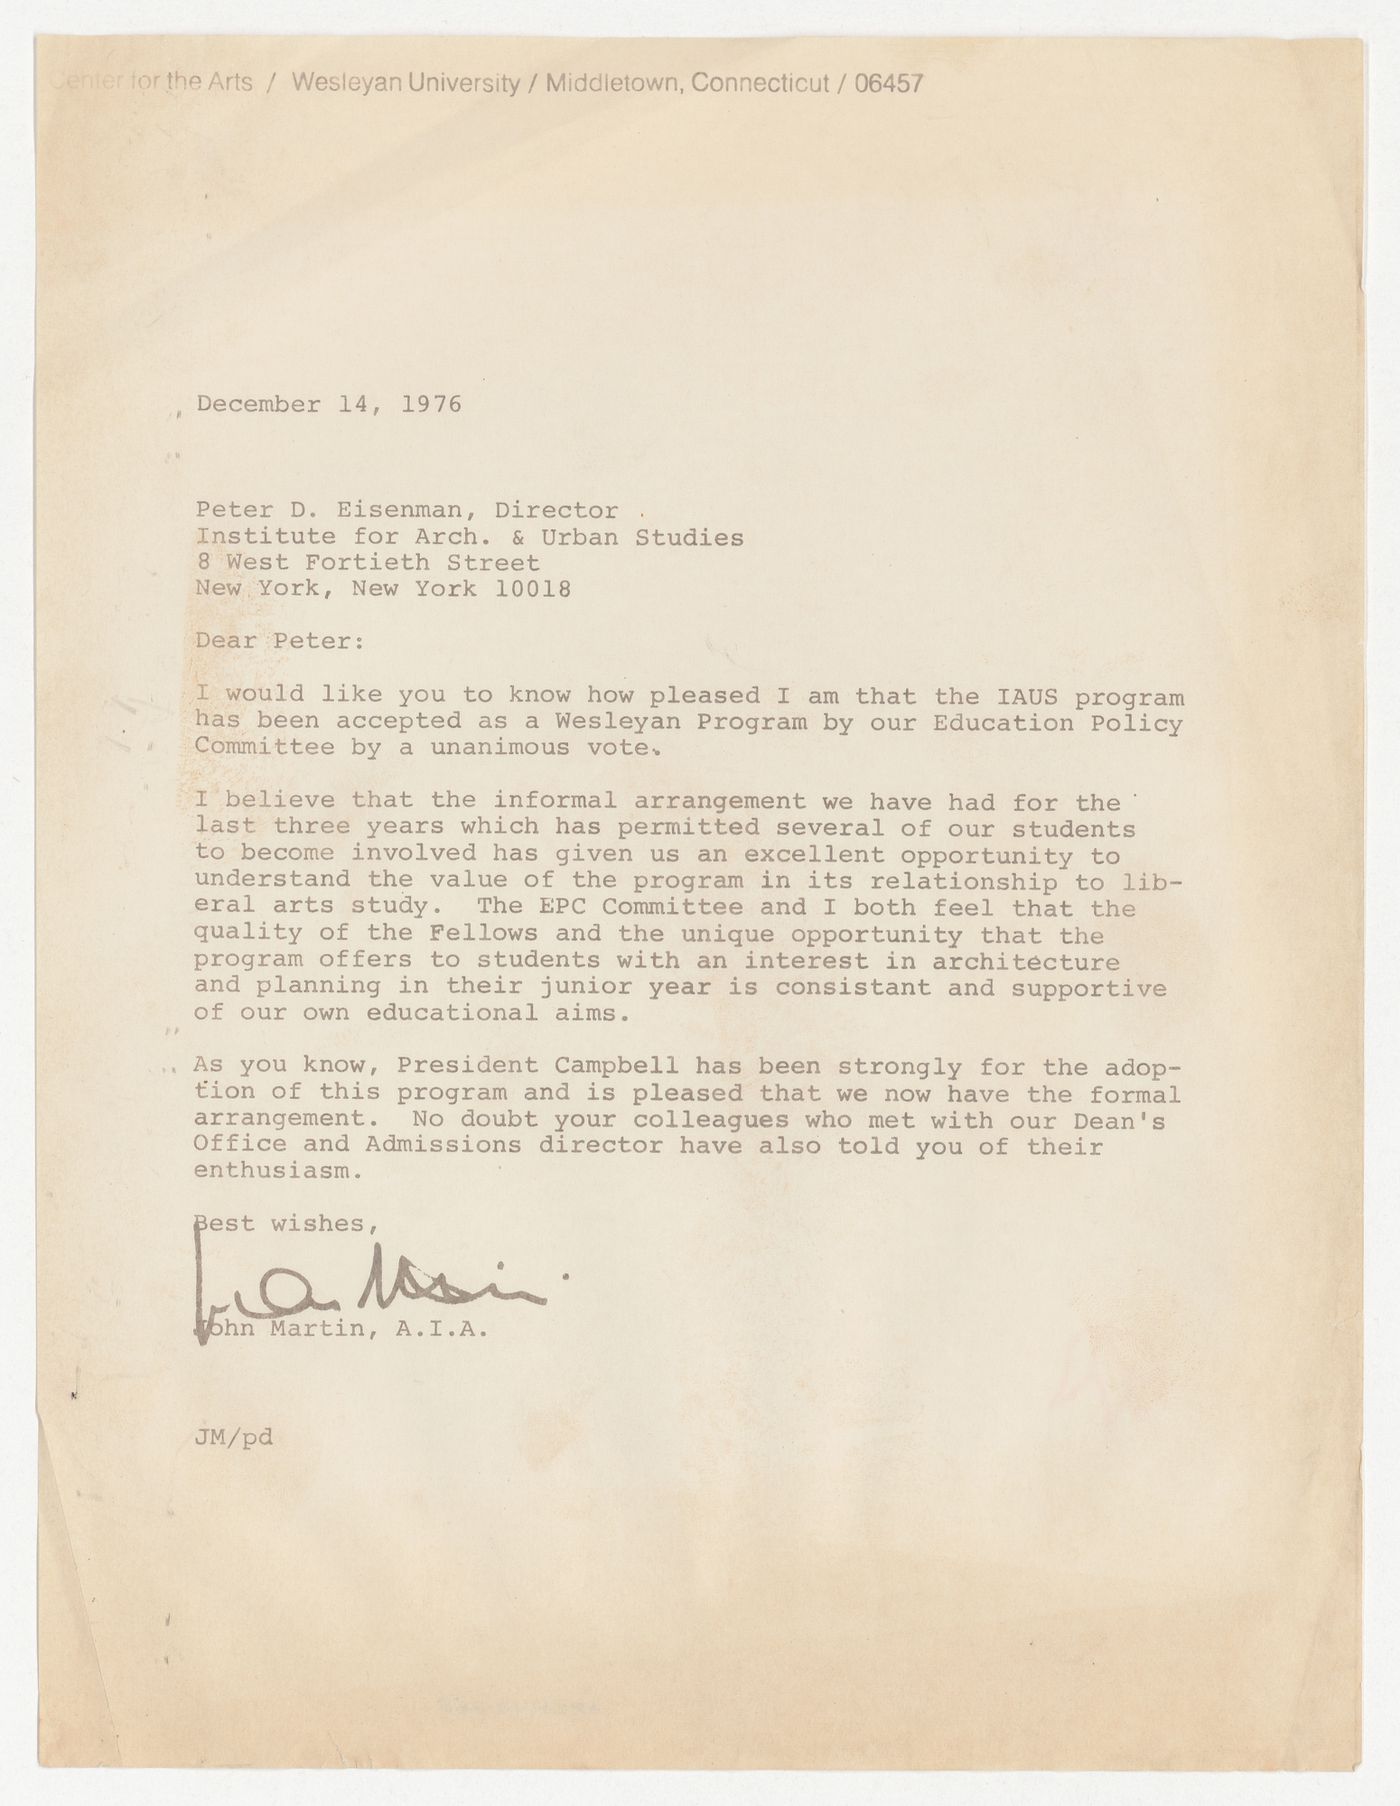 Letter from John Martin to Peter D. Eisenman about collaboration between Wesleyan University and IAUS